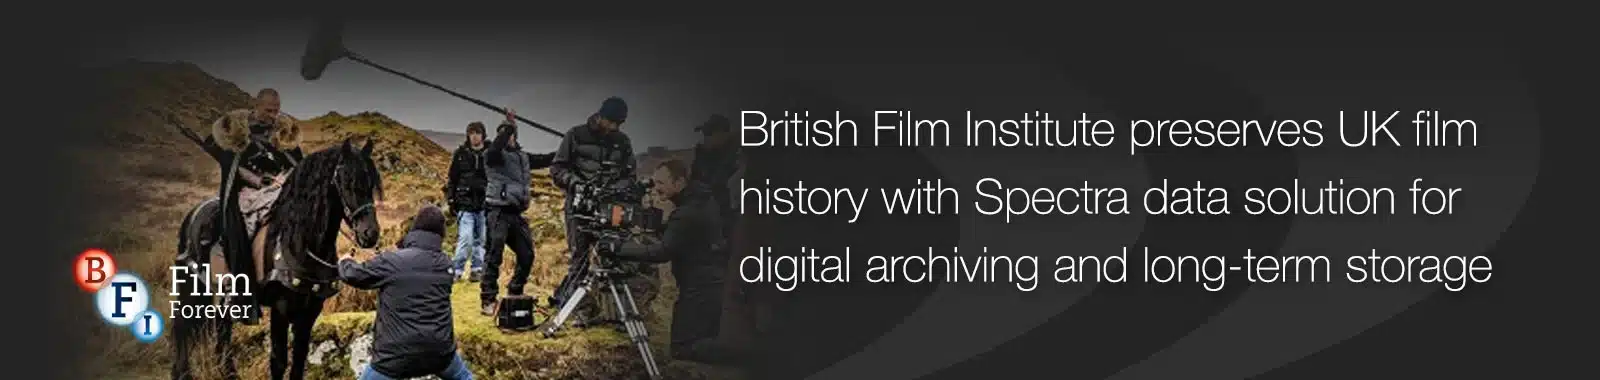 British Film Institute preserves UK film history with Spectra data solution for digital archiving and long-term storage